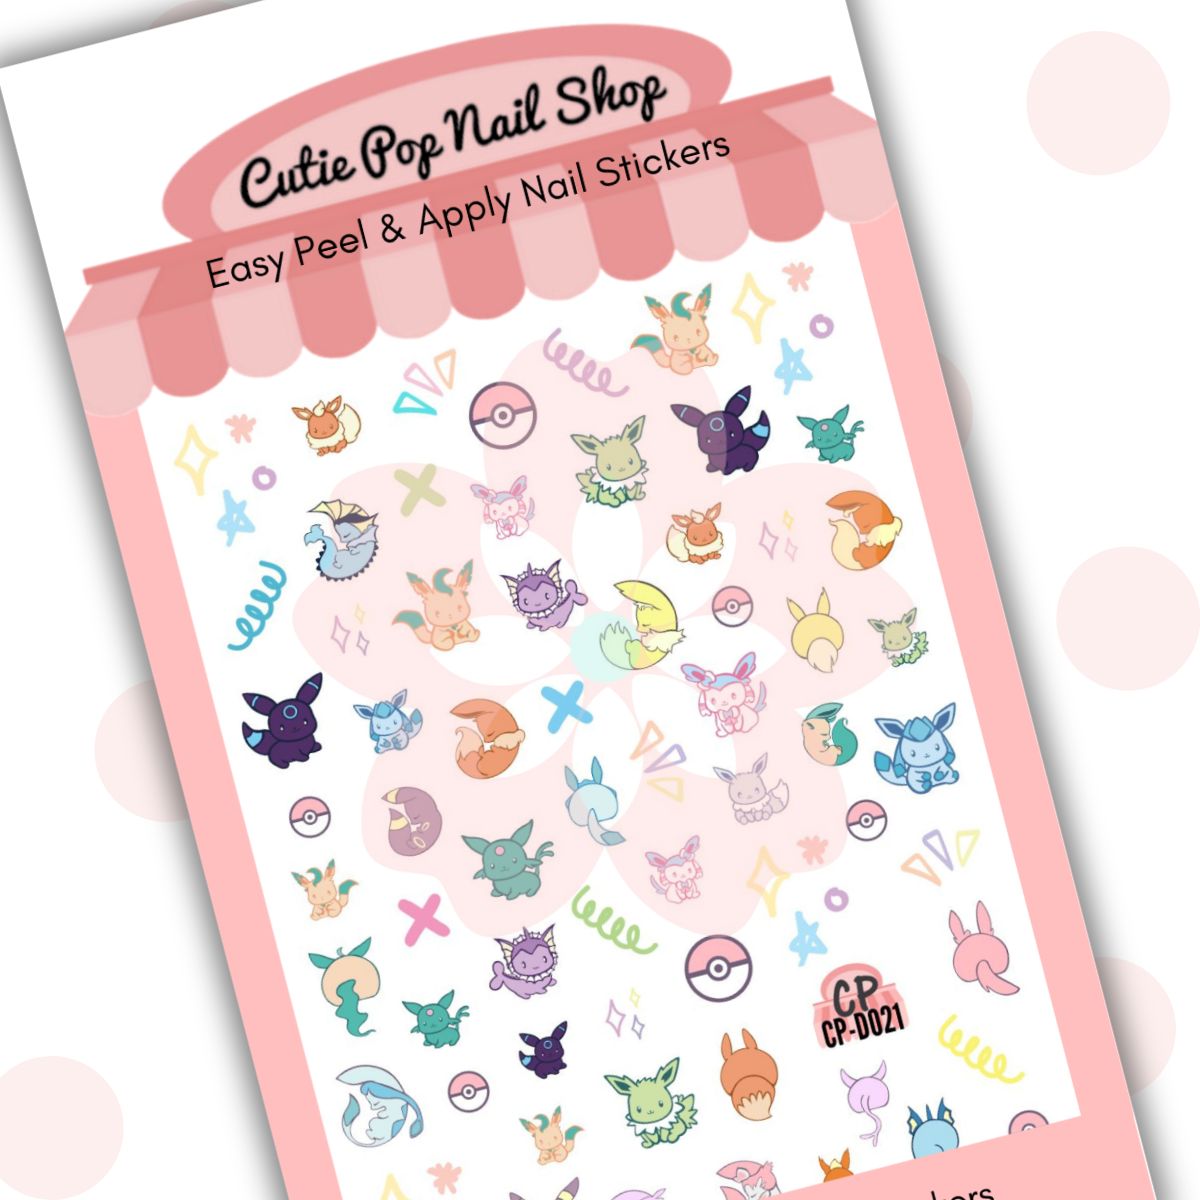 Cutie Pop Nail Shop’s Eevolution nail decals. The nail sticker designs includes pastel fanart of eevee pokemon in various evolving stages. Also included are a range of white-and-red balls, pink, blue, and green crosses, and yellow, purple, blue, and red miscellaneous shapes (stars, triangles, diamonds, circles, asterisks).